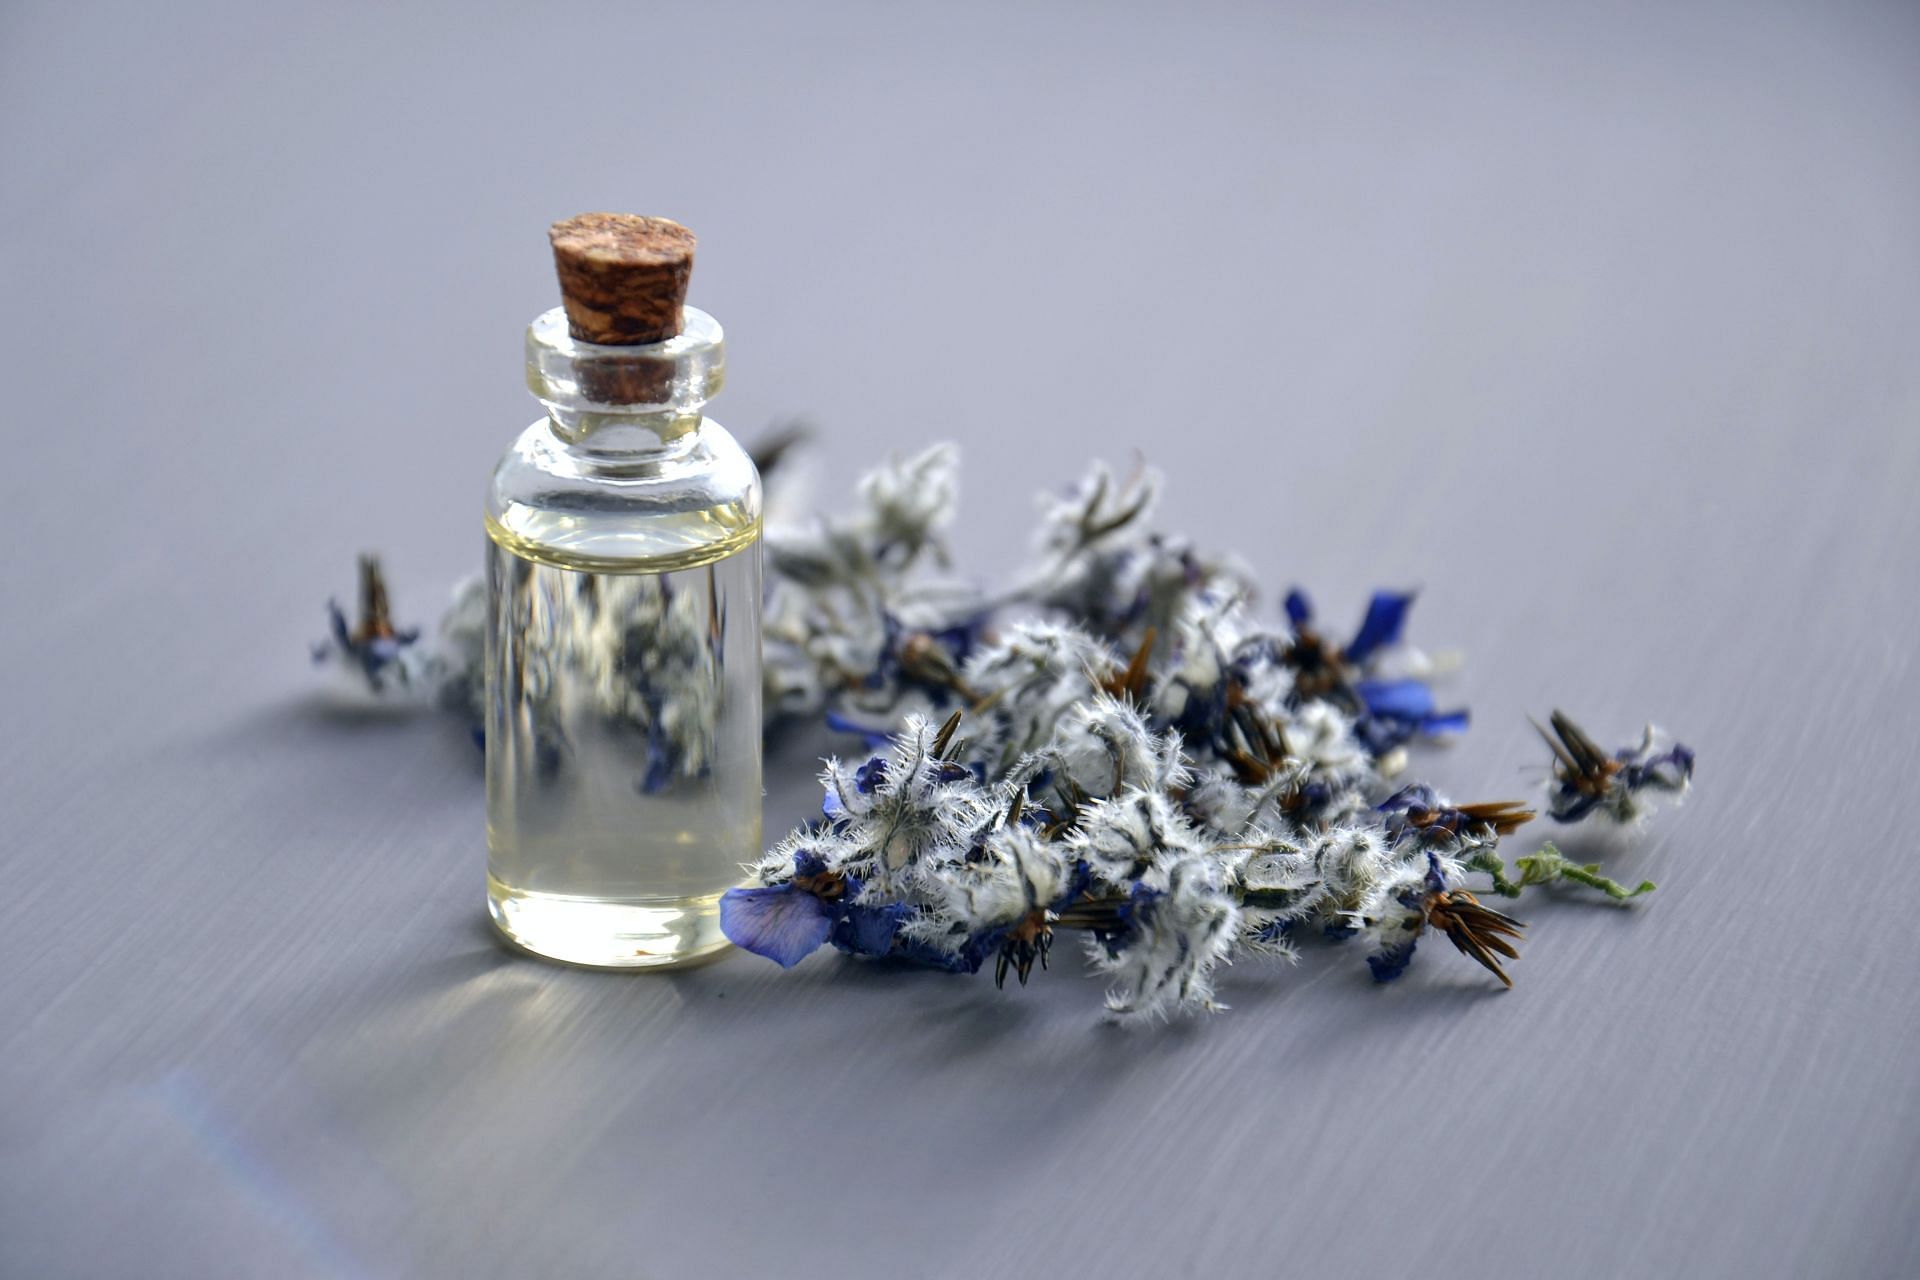 Lavender oil can be used as an alternative. (Image via Pexels/Mareefe)